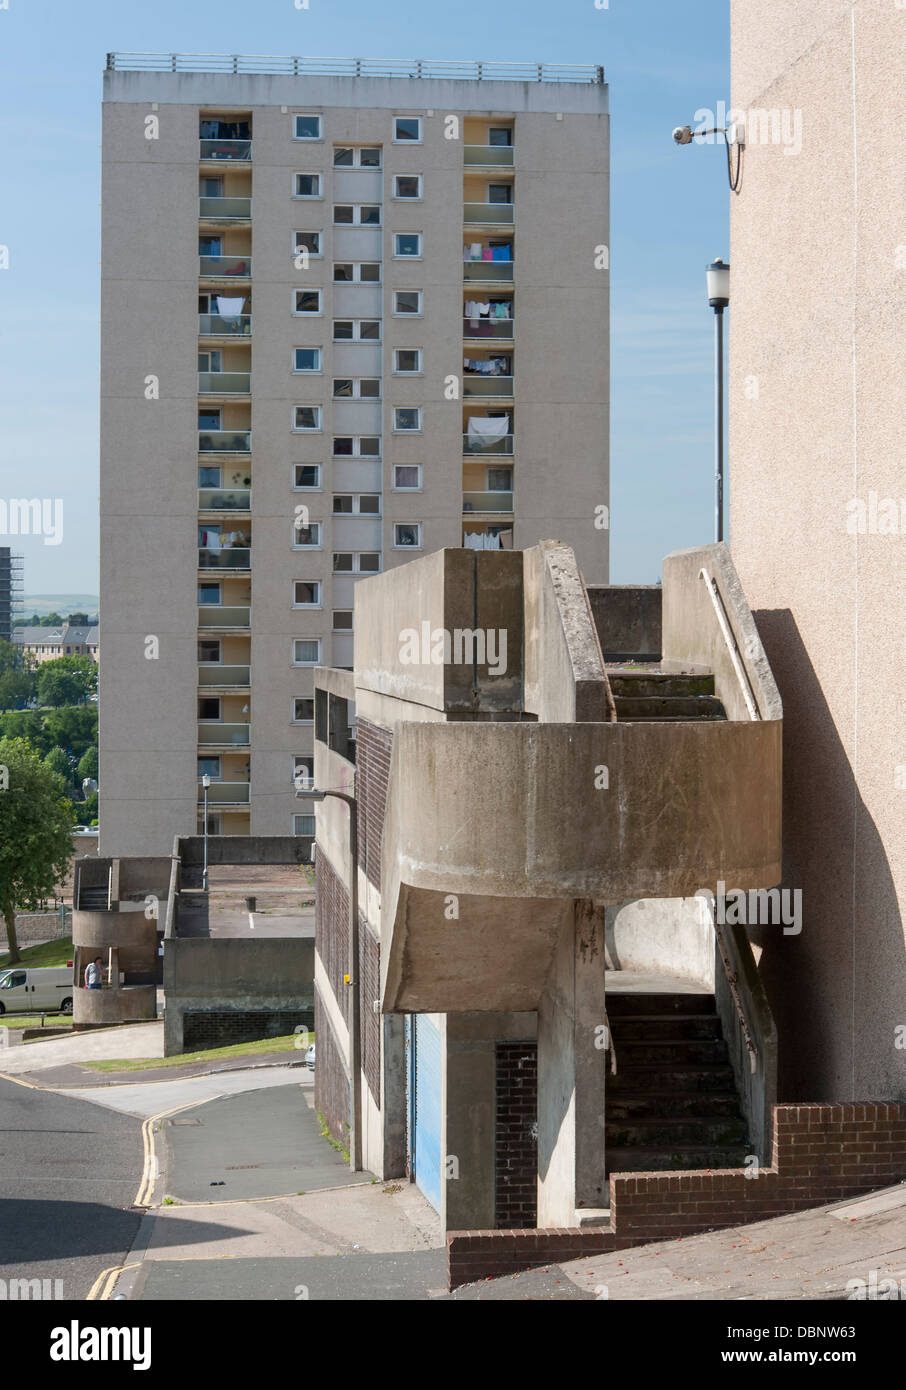 1960s styled high rise flats with deco staircase Stock Photo